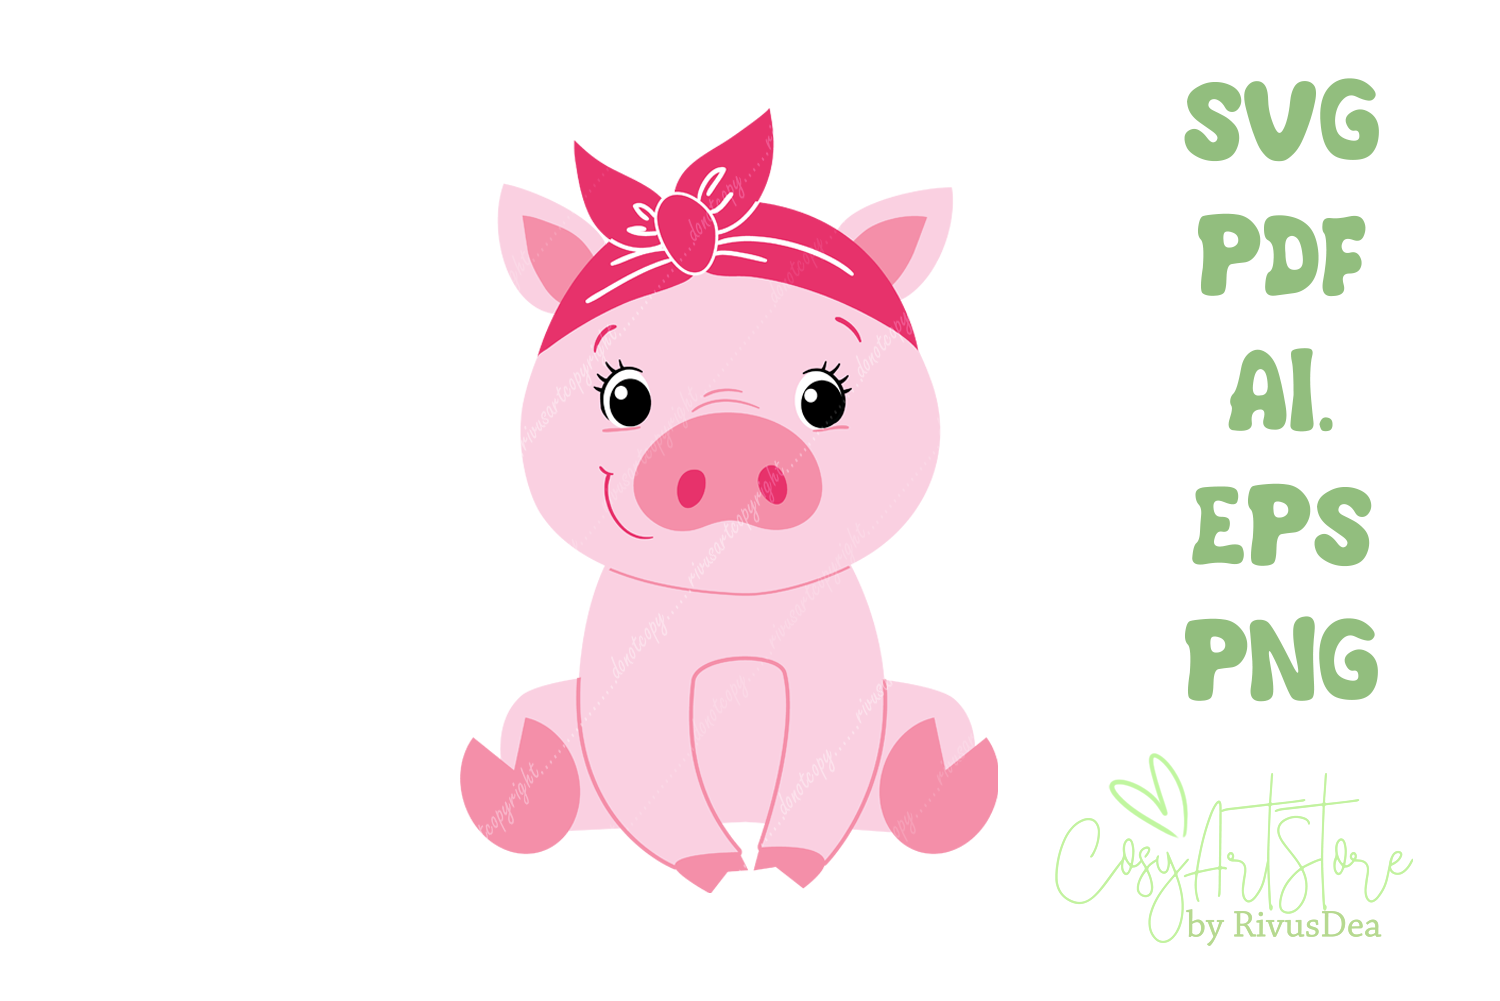 Download Cute Bandana Pig Svg File Download Baby Piggy In Red Scarf By Rivus Art Thehungryjpeg Com